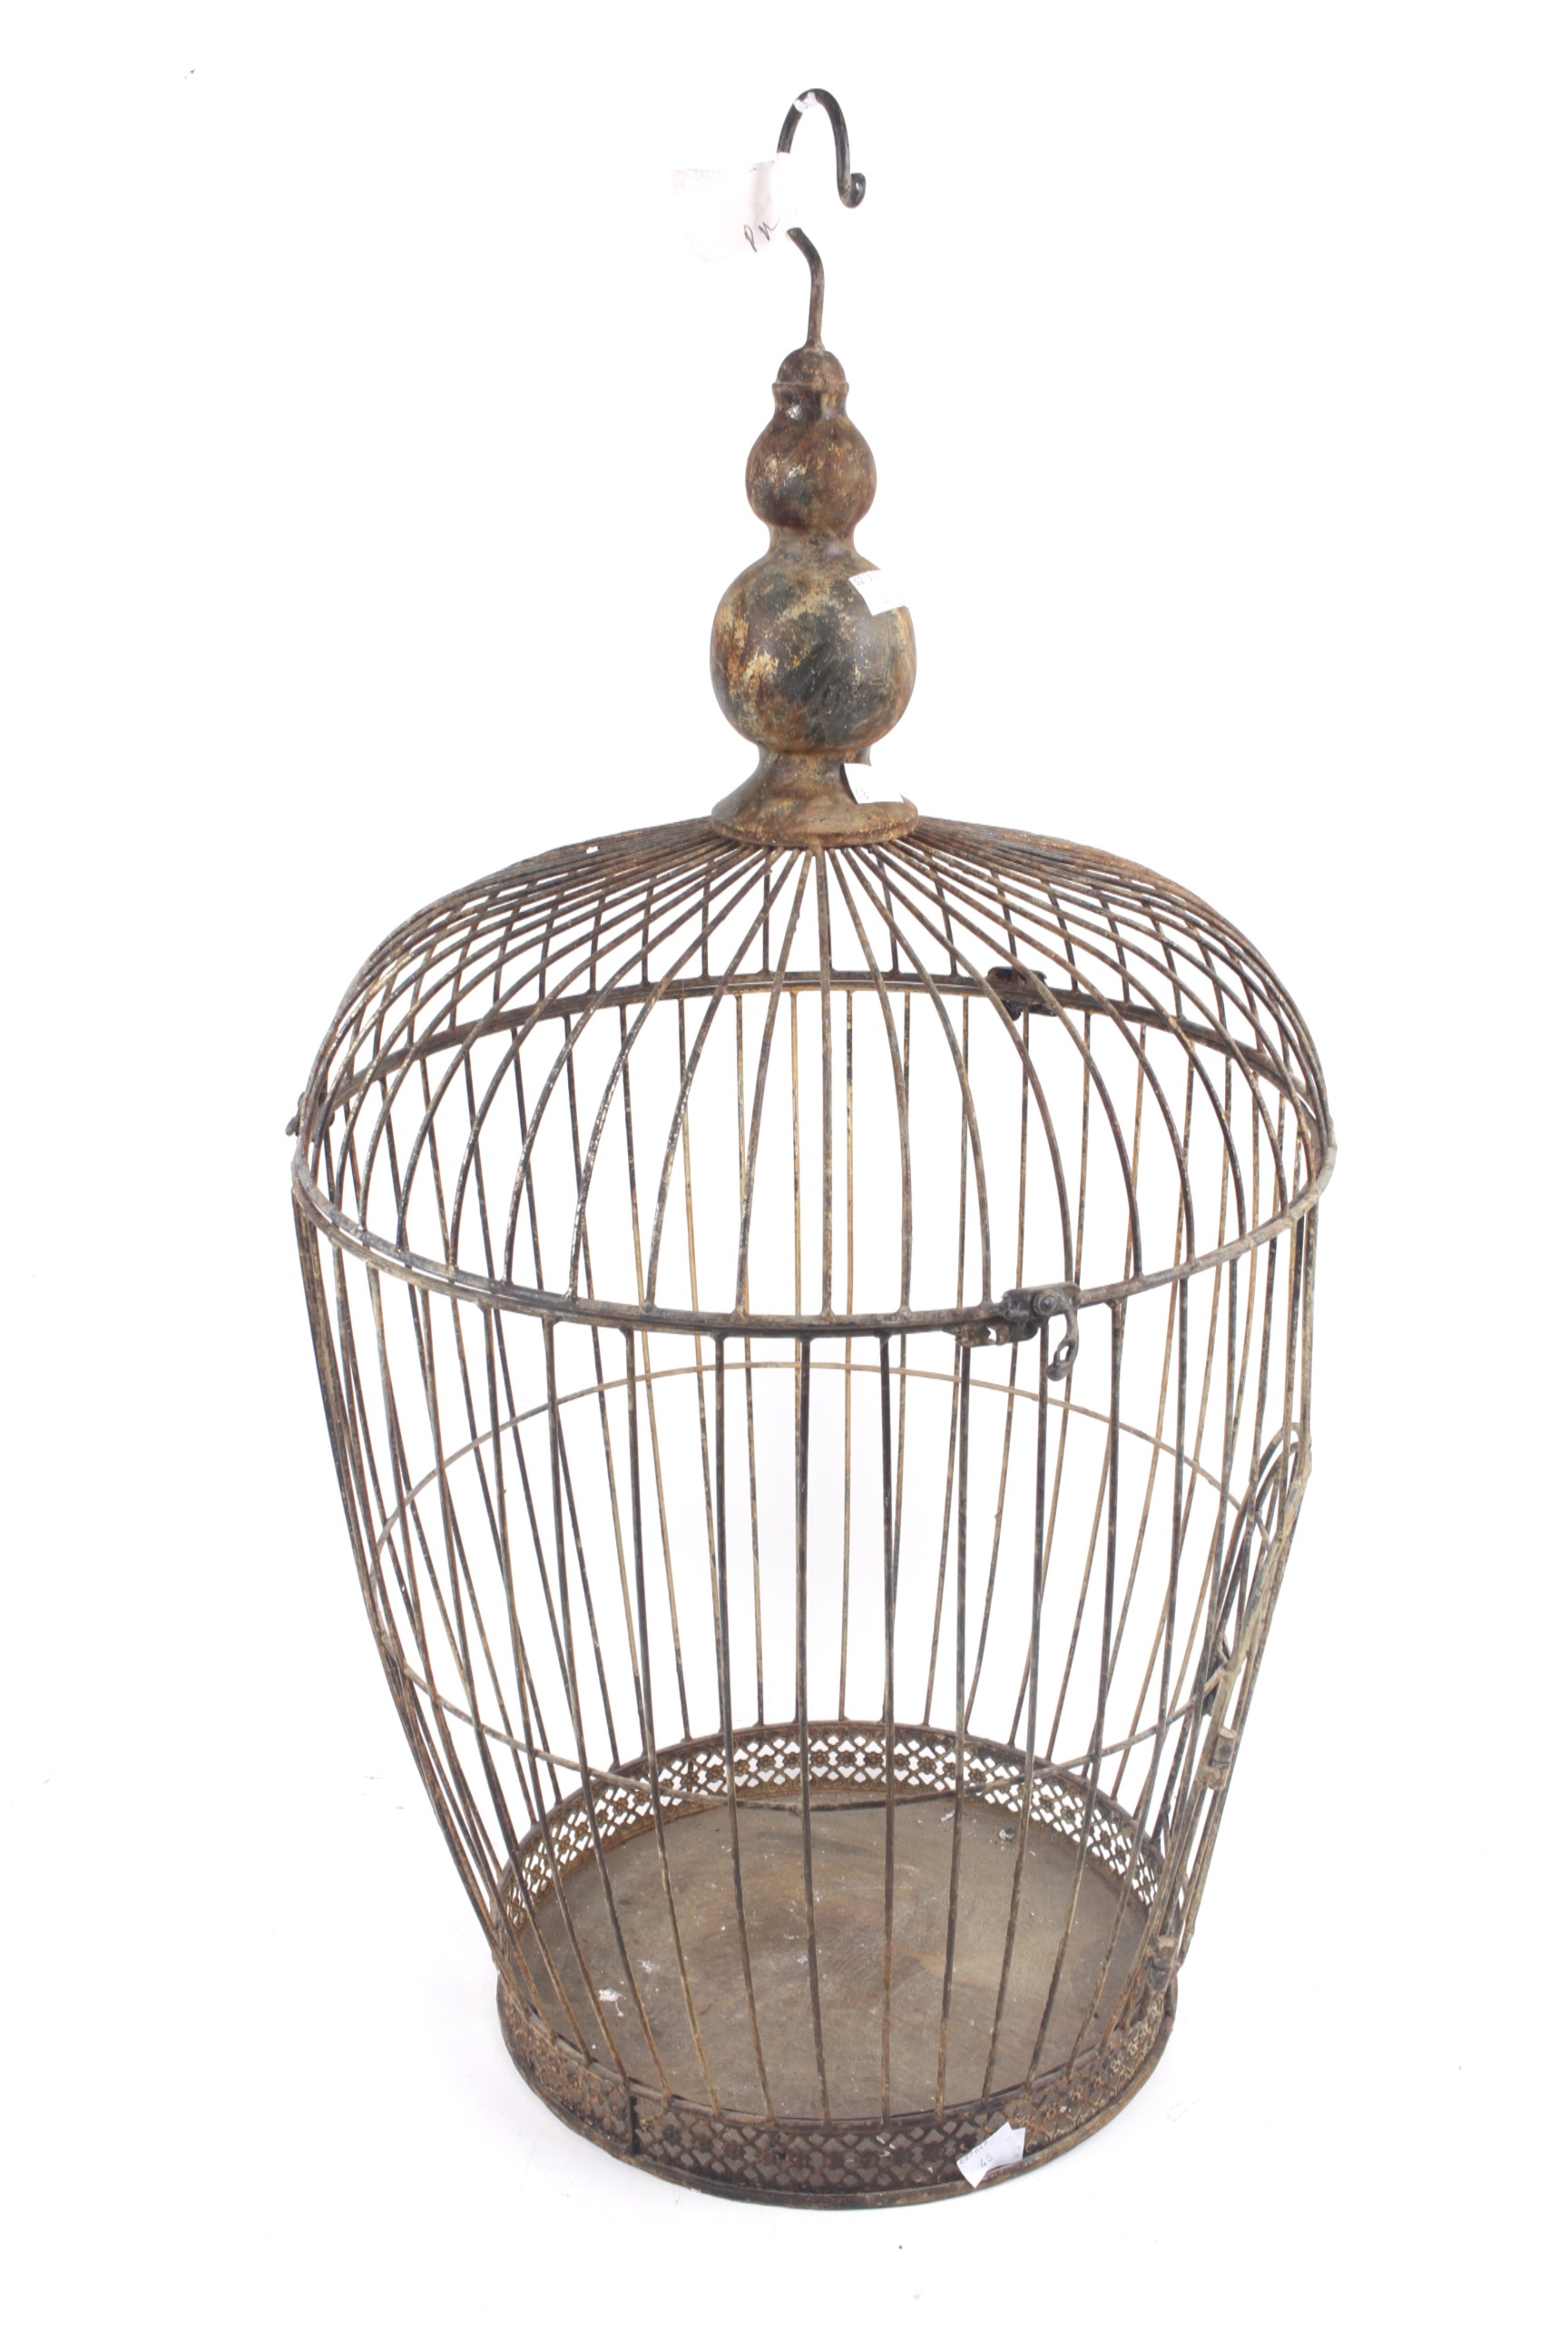 A late 19th/early 20th century bid cage.